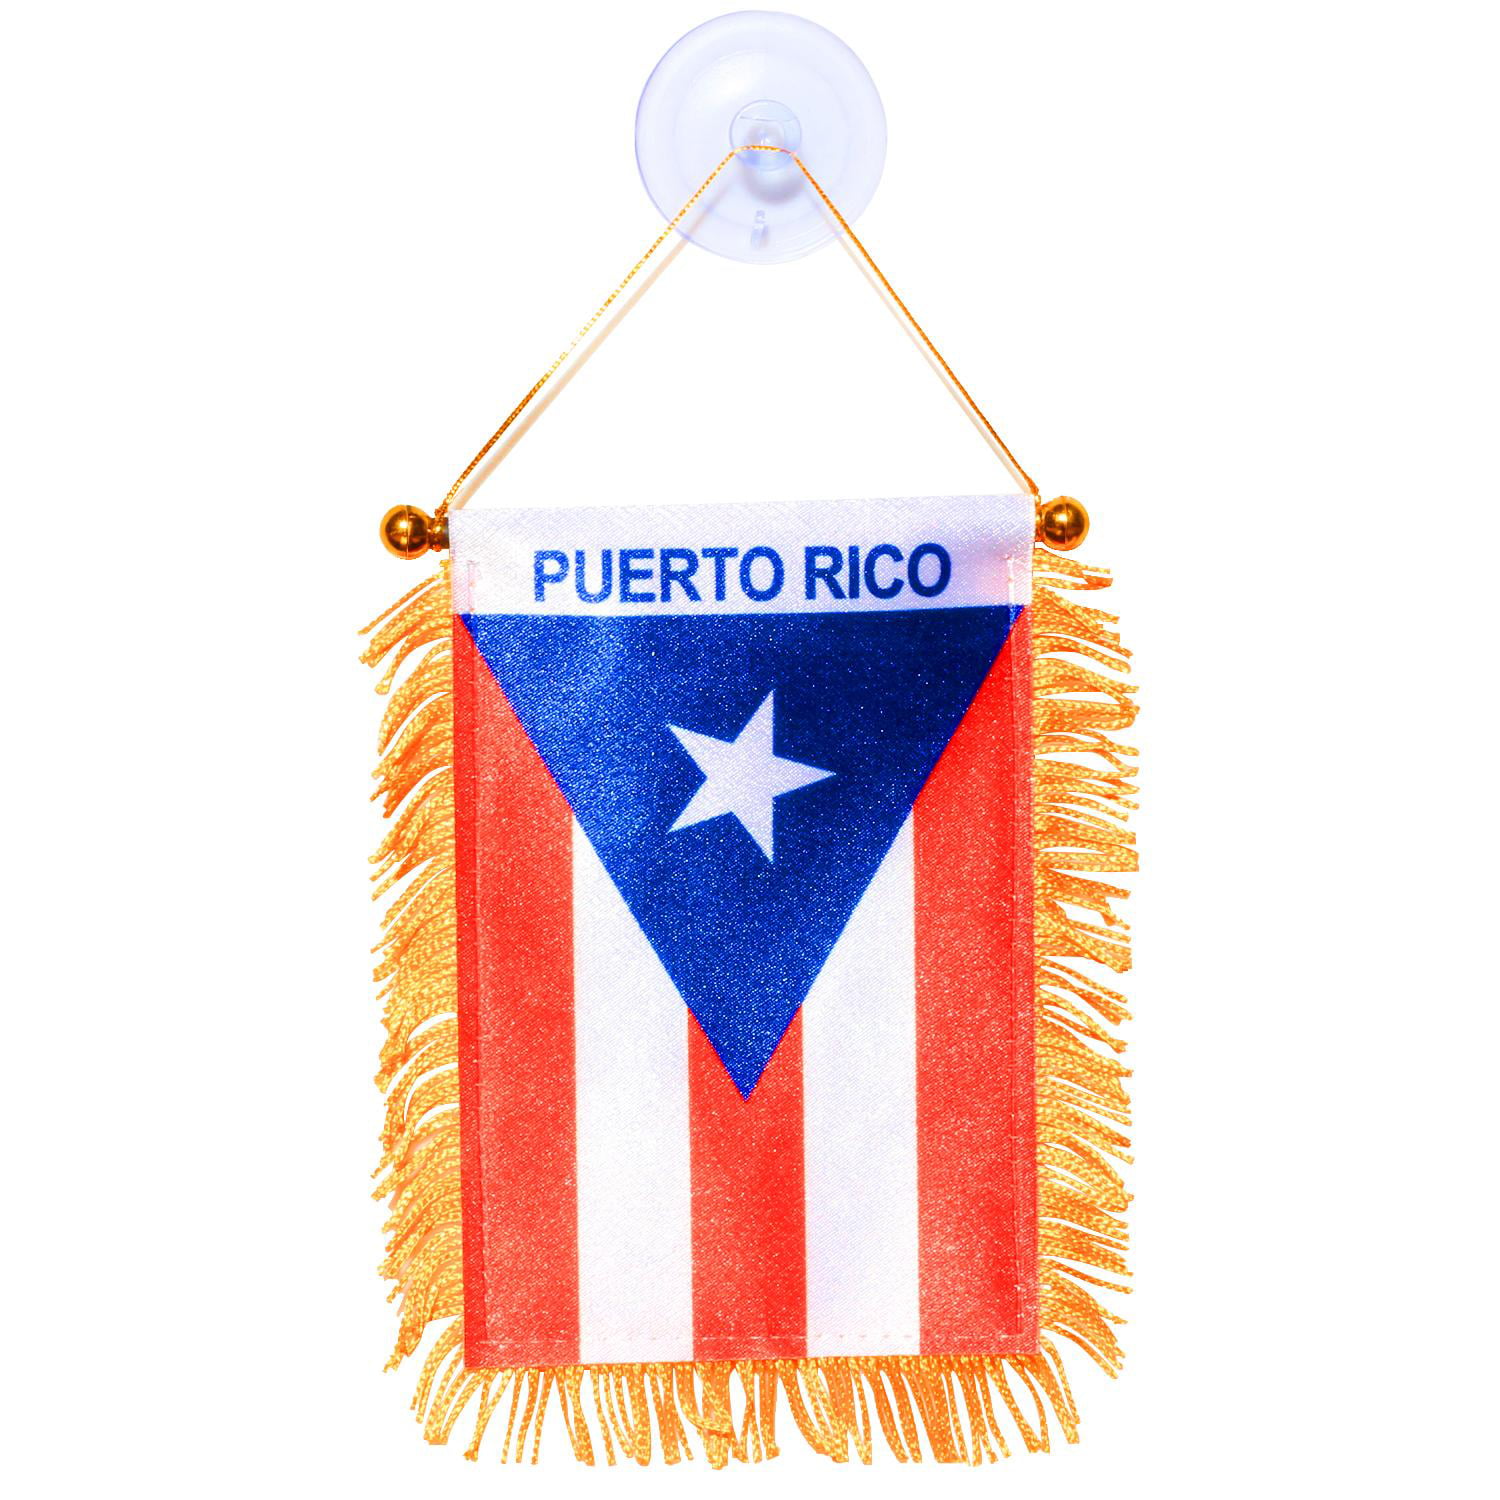 UNITY FLAGZ Puerto RICO and Panama Boricua Panamanian Caribbean South American Rear View Mirror Hanging CAR Flags Mini Banners for Inside The CAR